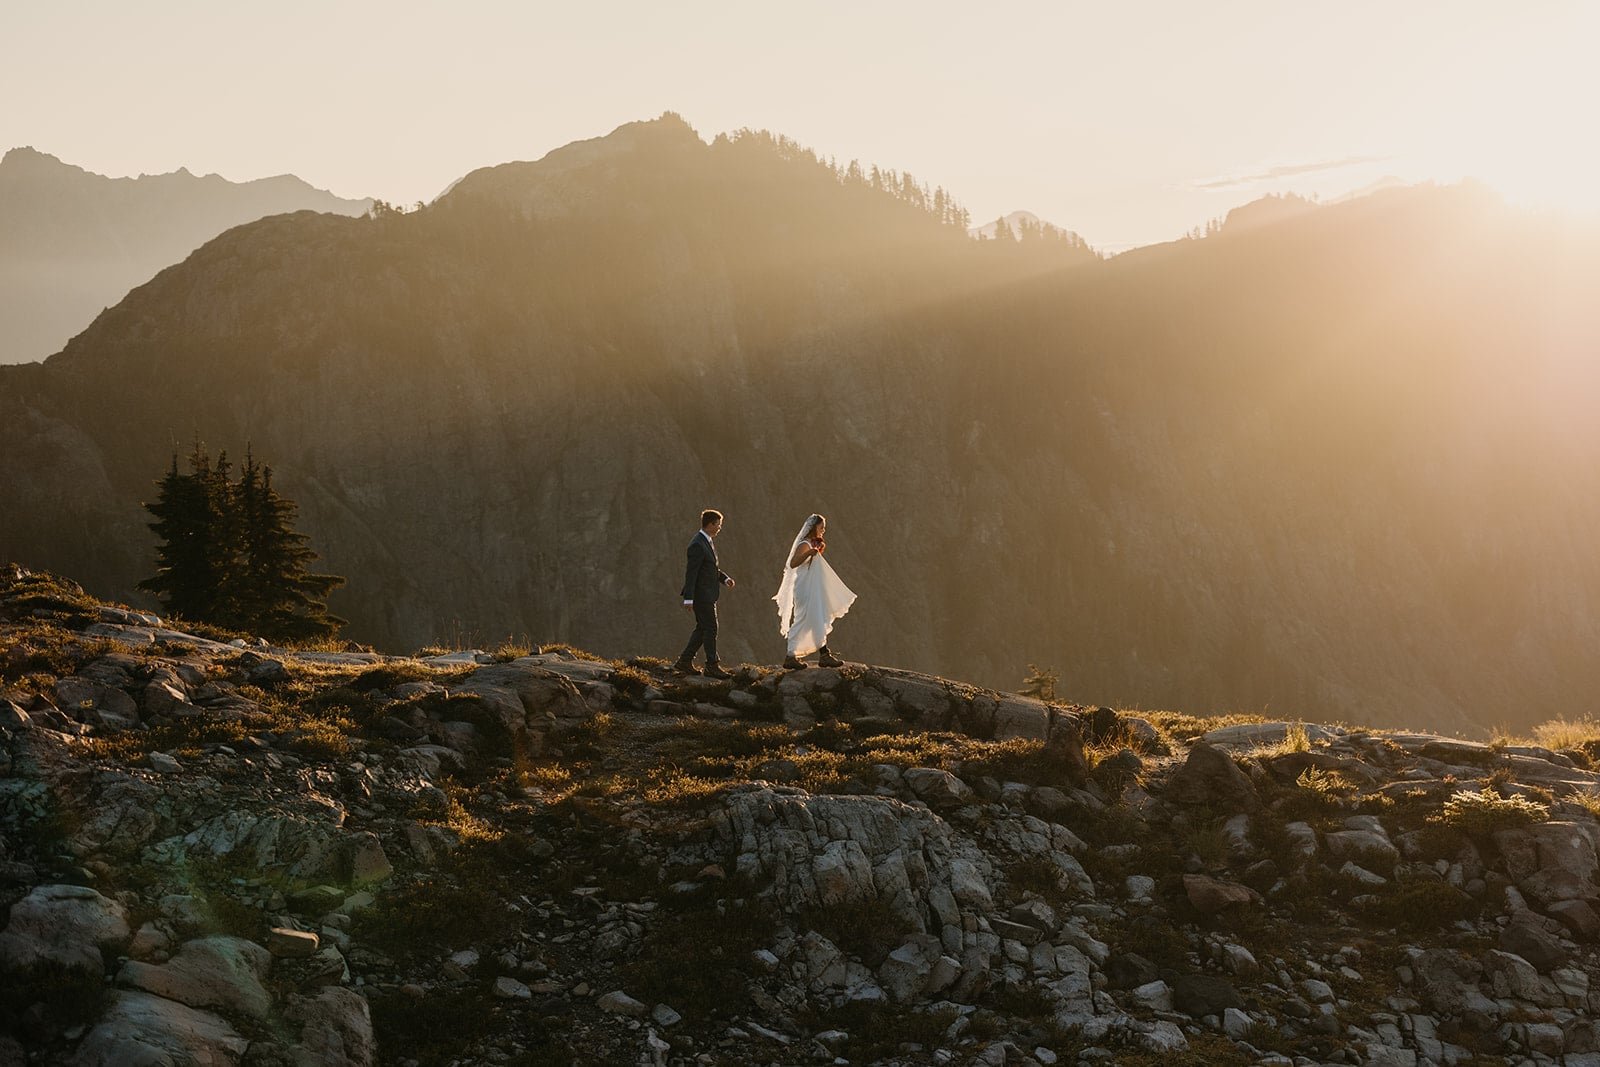 A couple hikes in the mountains during private vows.